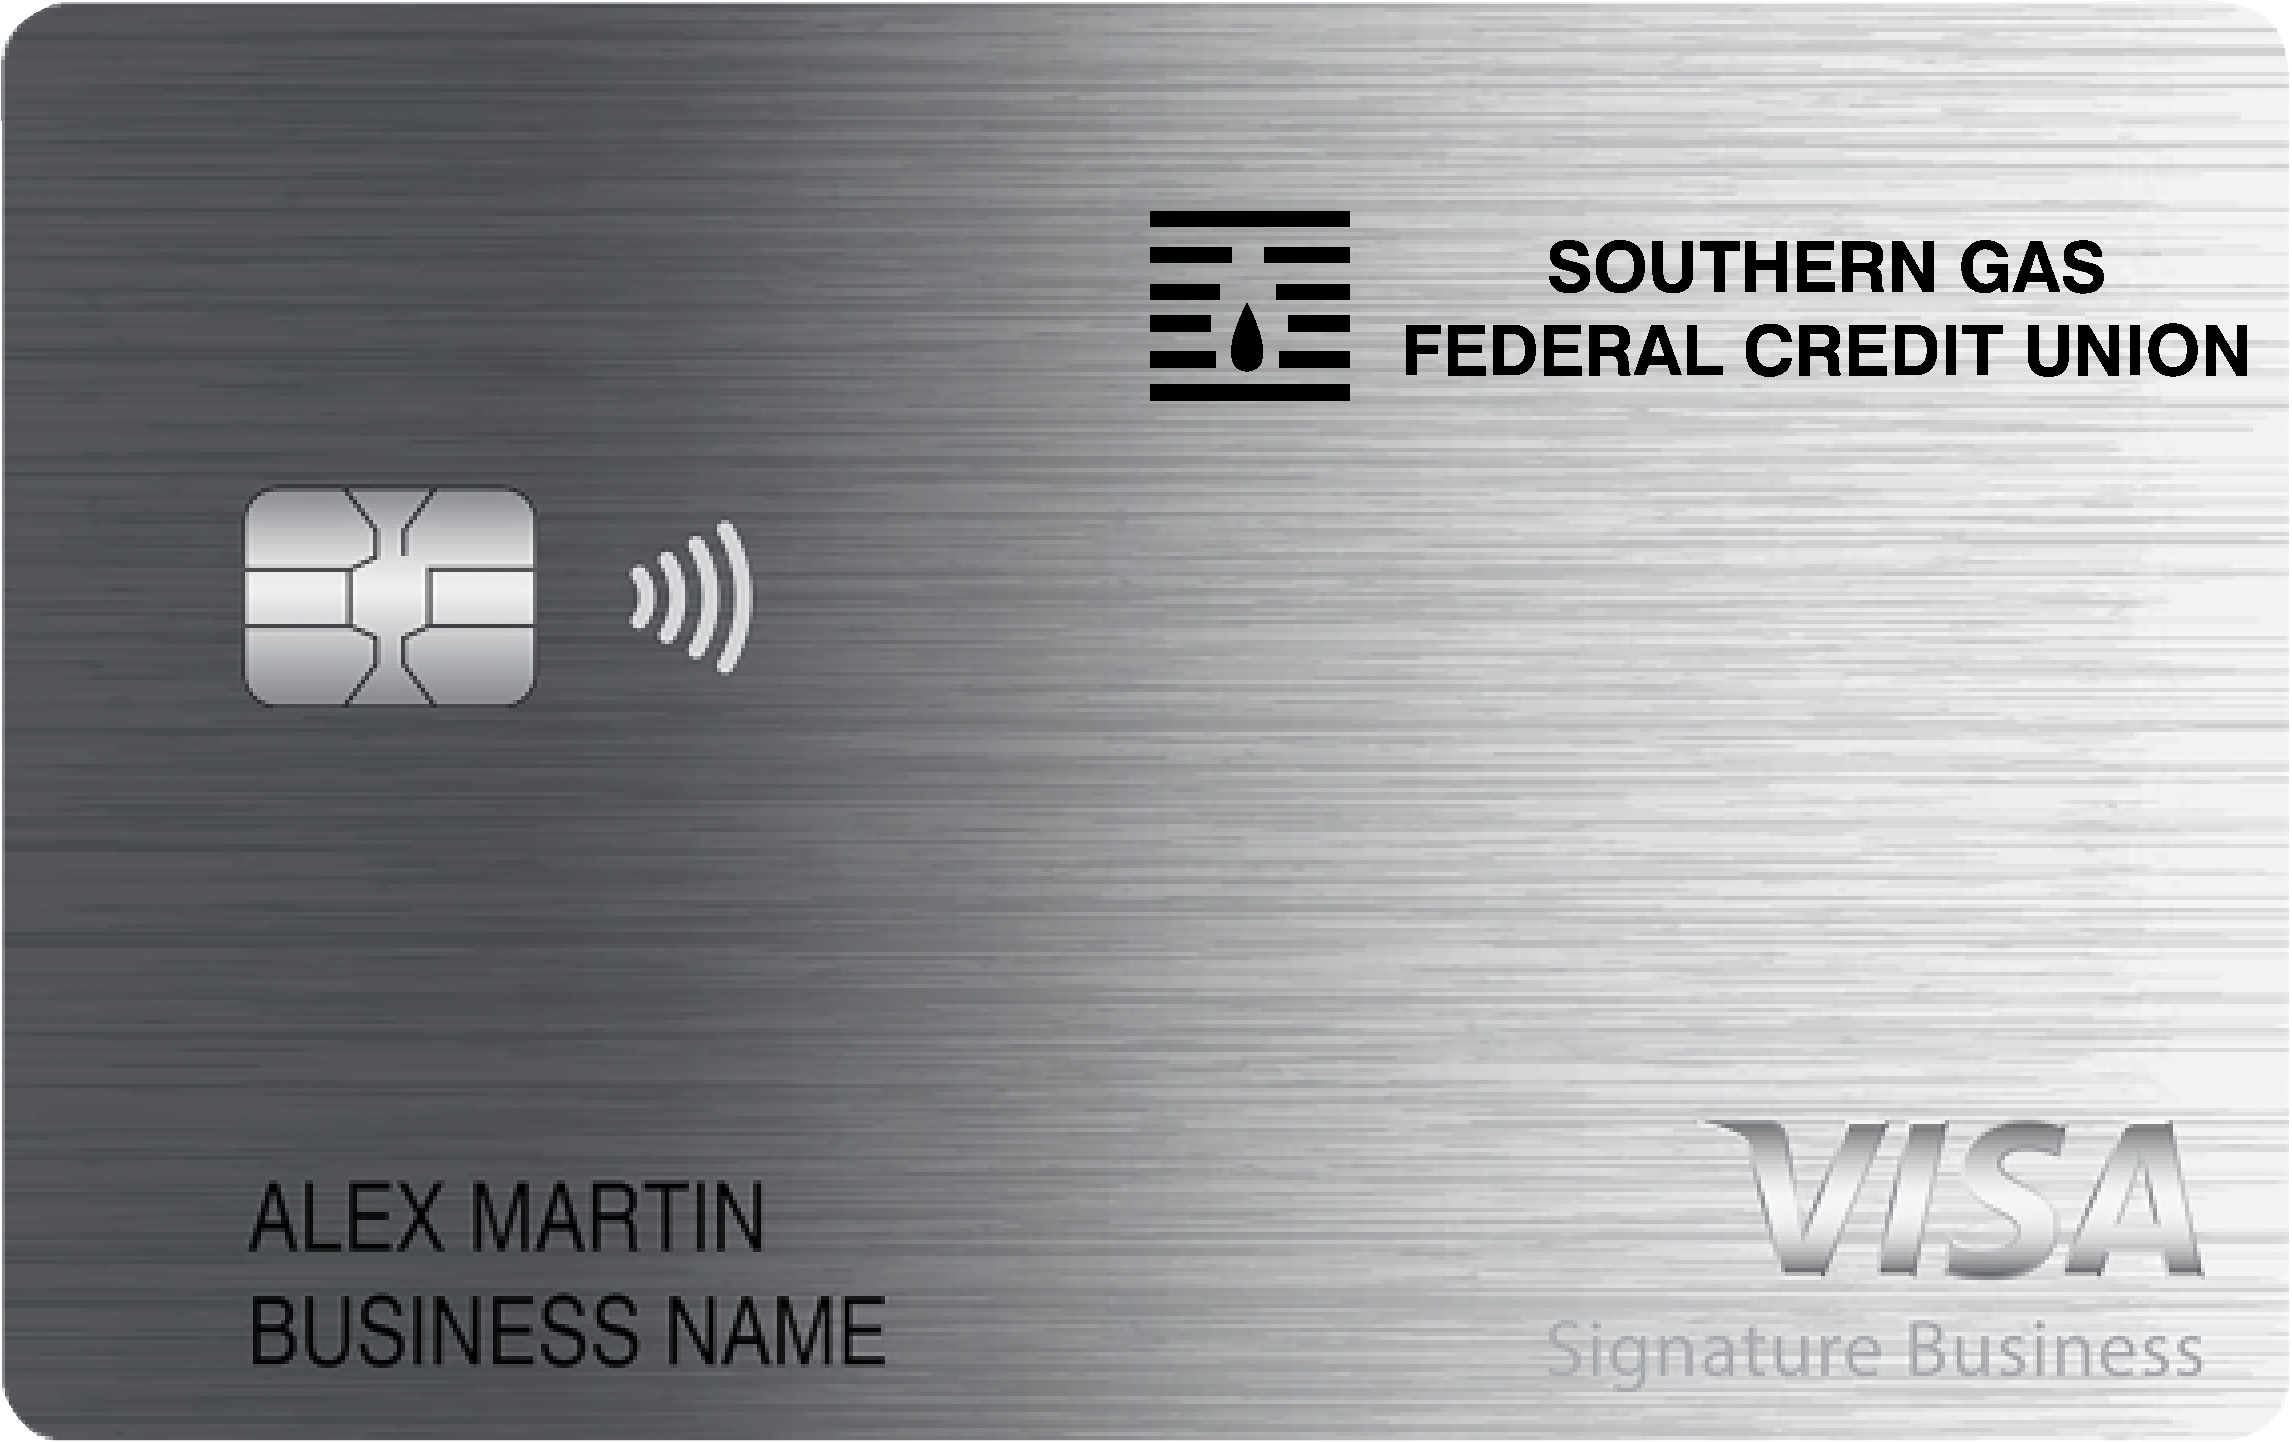 Southern Gas Federal Credit Union Smart Business Rewards Card